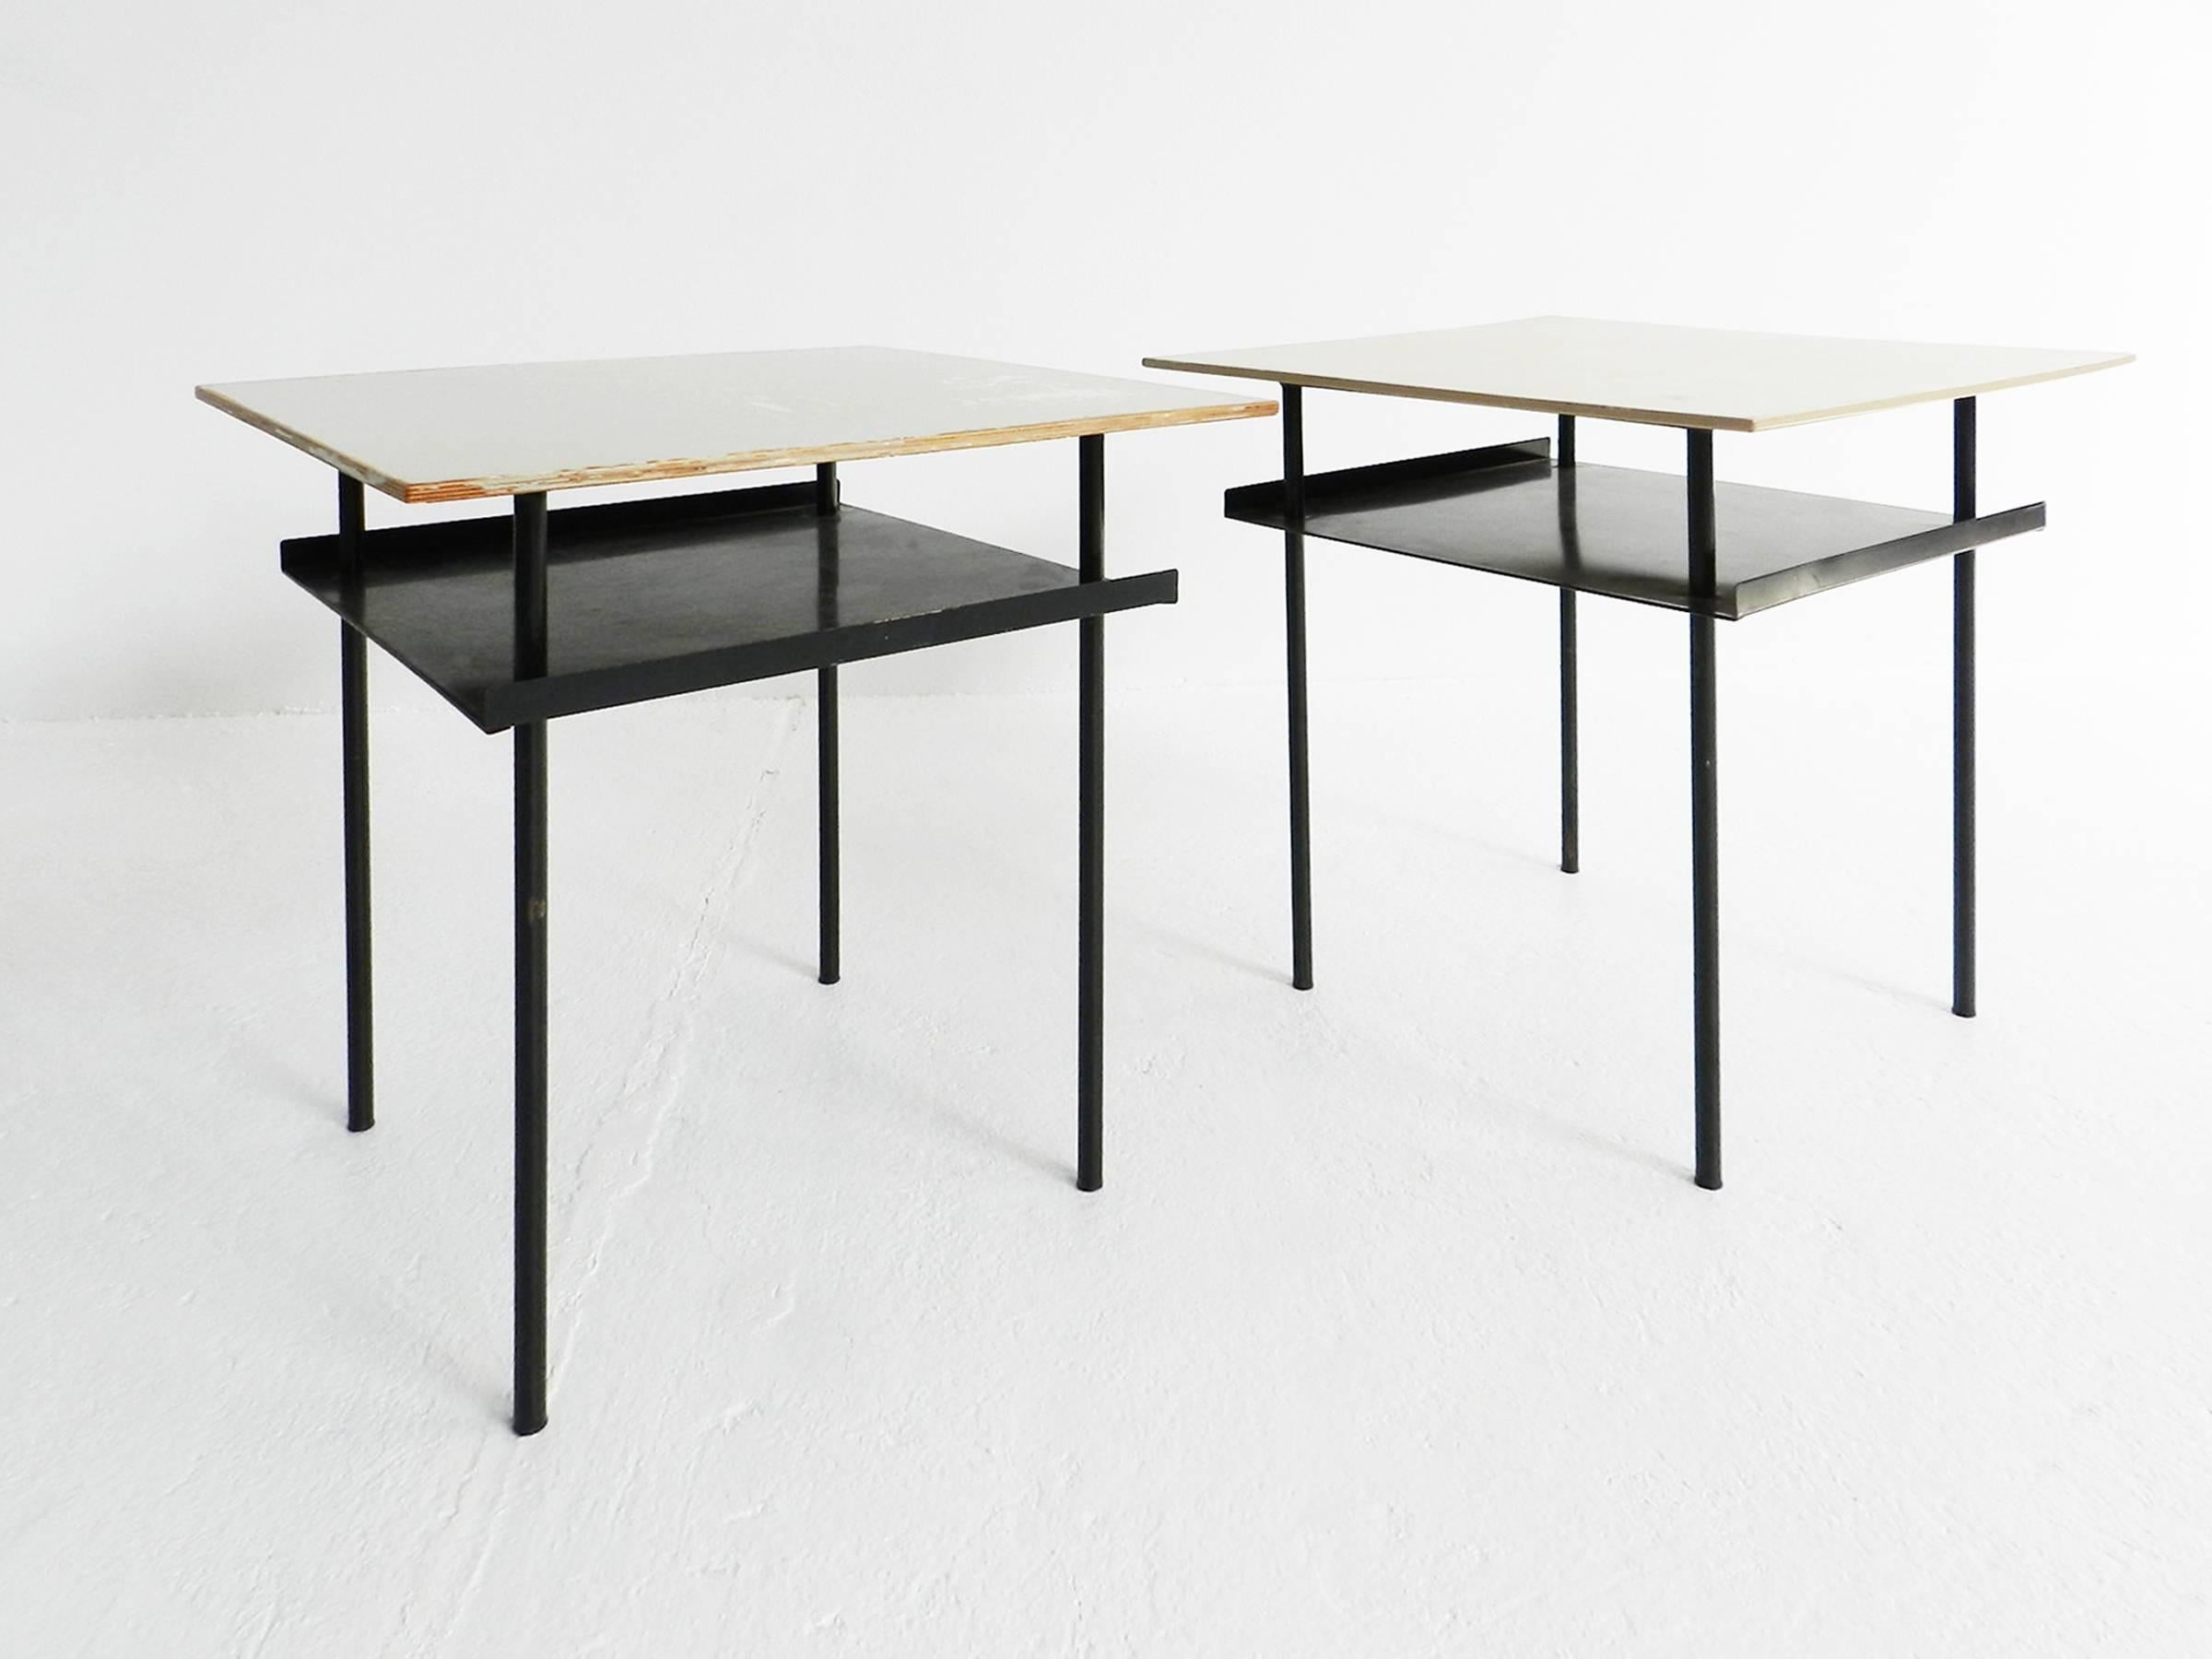 Pair of Auping side tables by Wim Rietveld.